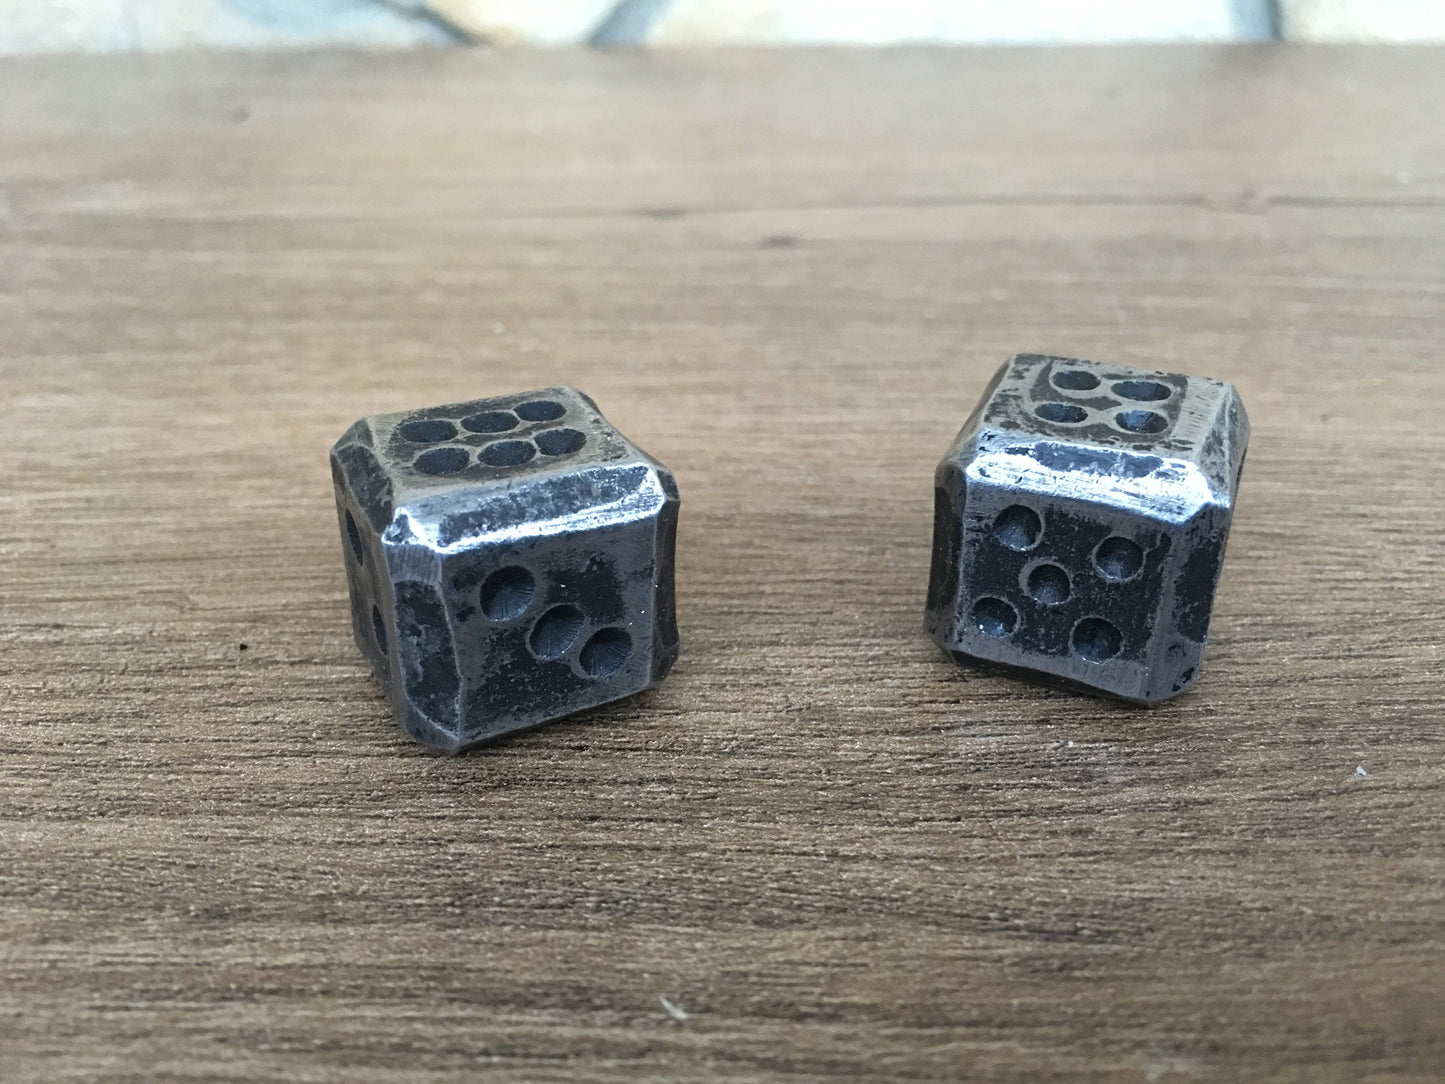 Dices, set of dices, iron dice, steel dice, custom dice, pair of dices,gambling dice,gaming dice,role playing games,tabletop dices,iron gift